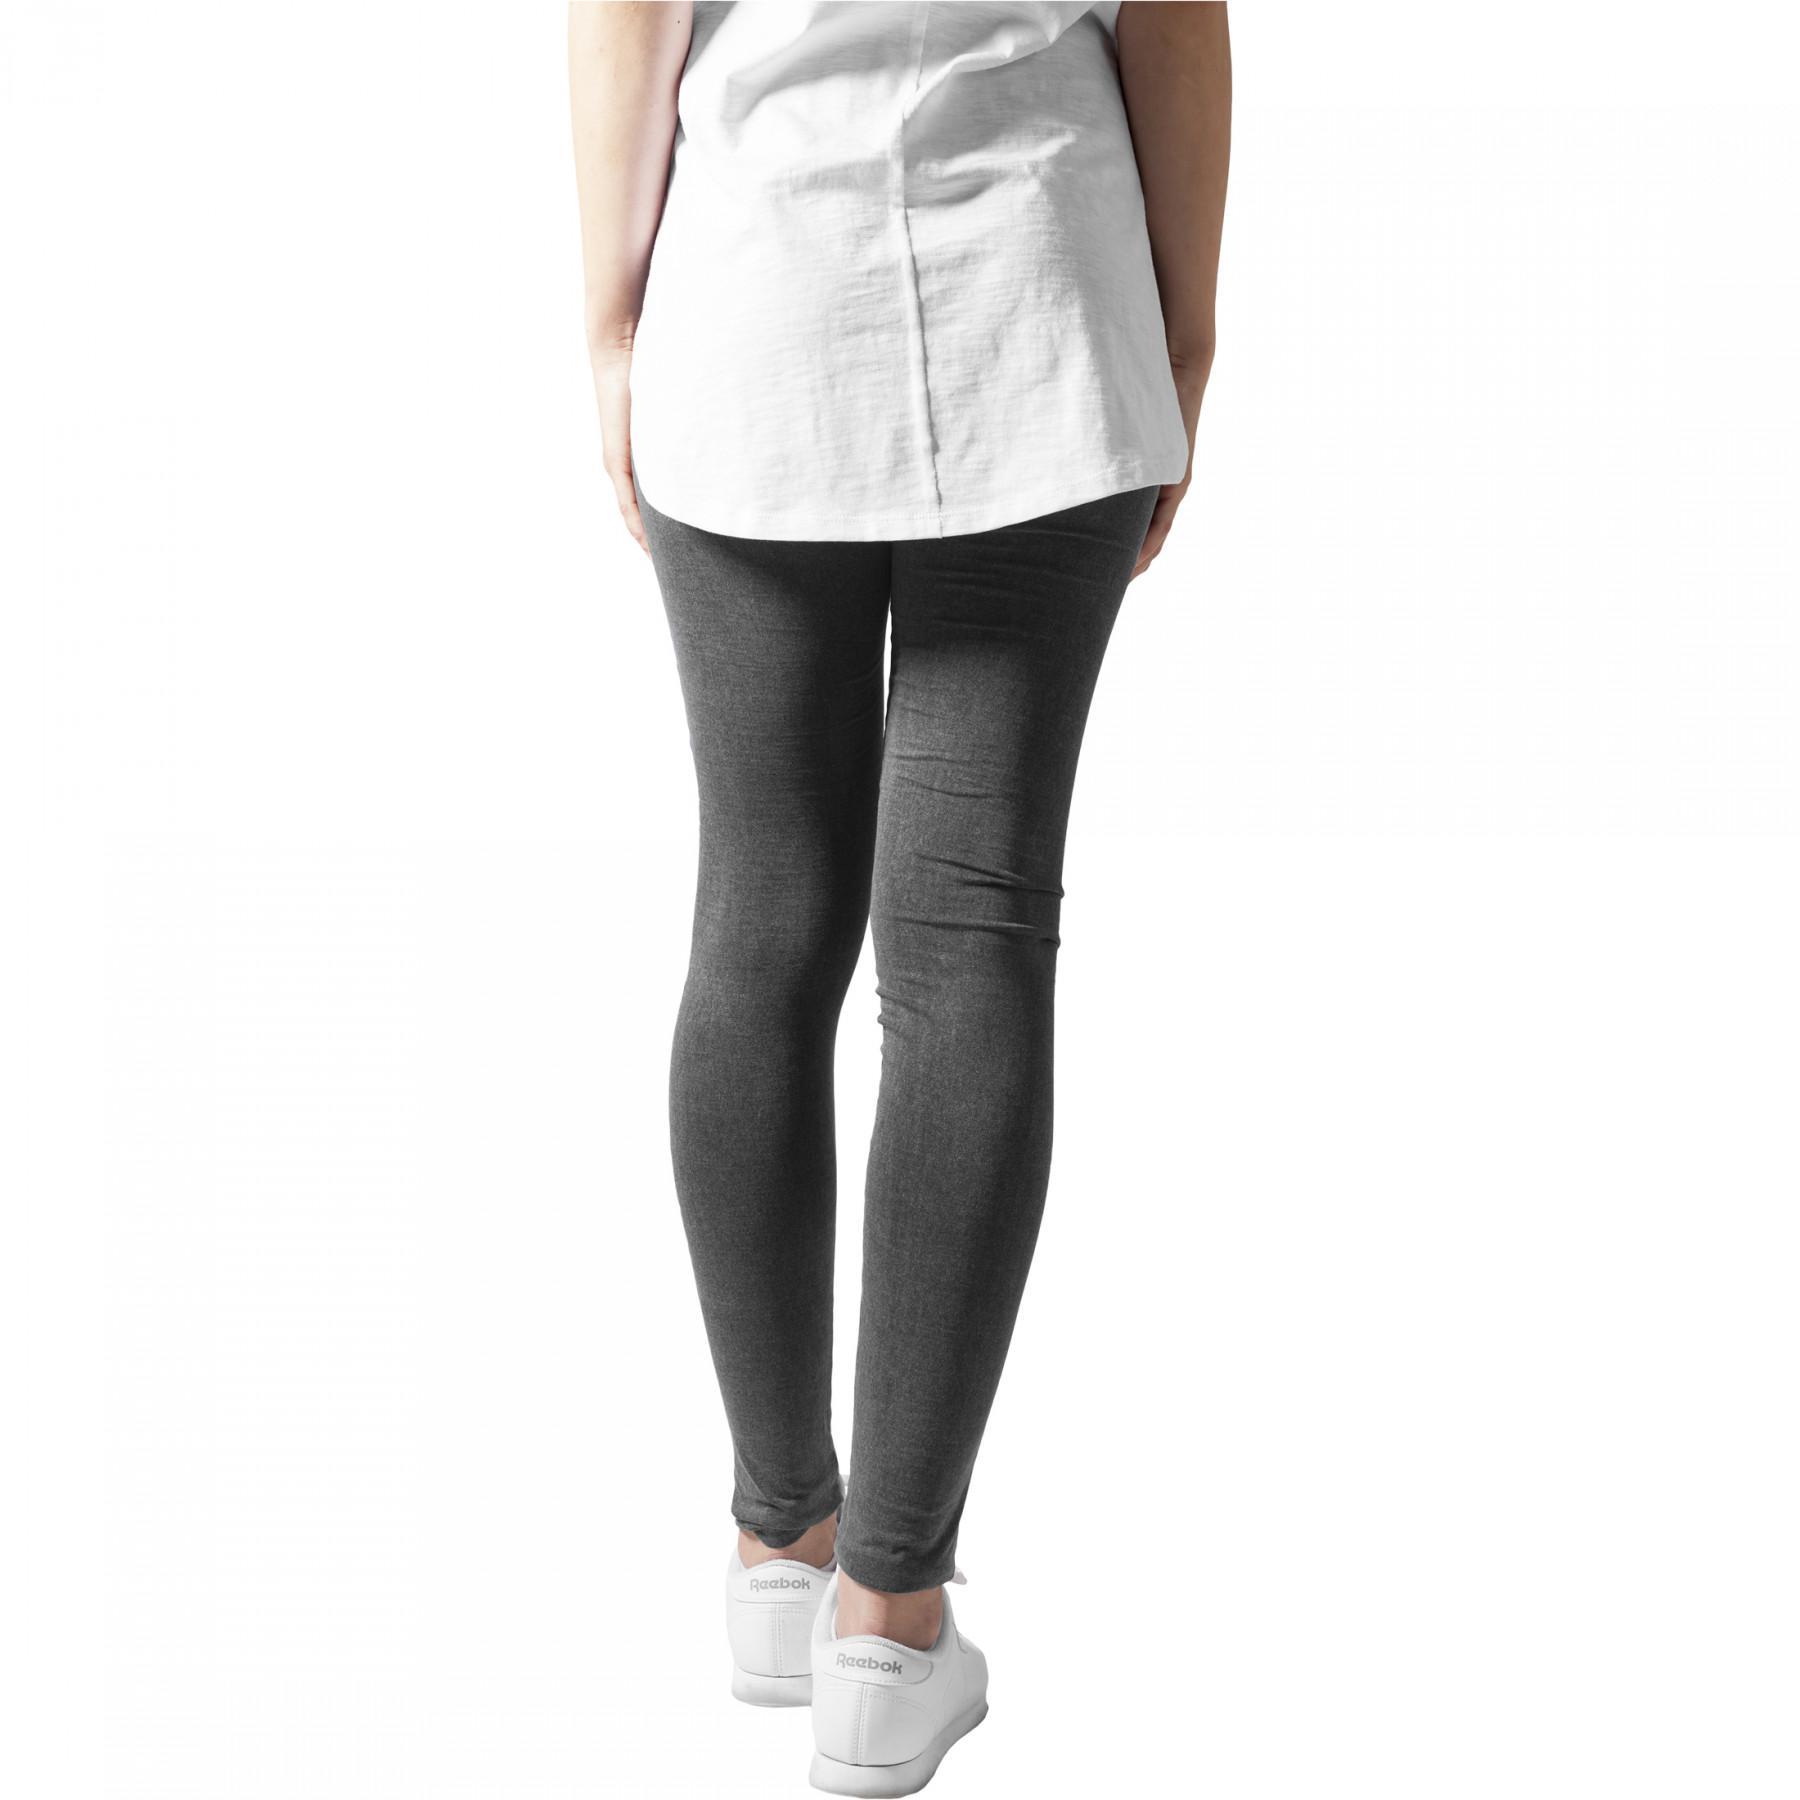 Urban Classic cutted knee leggings for women